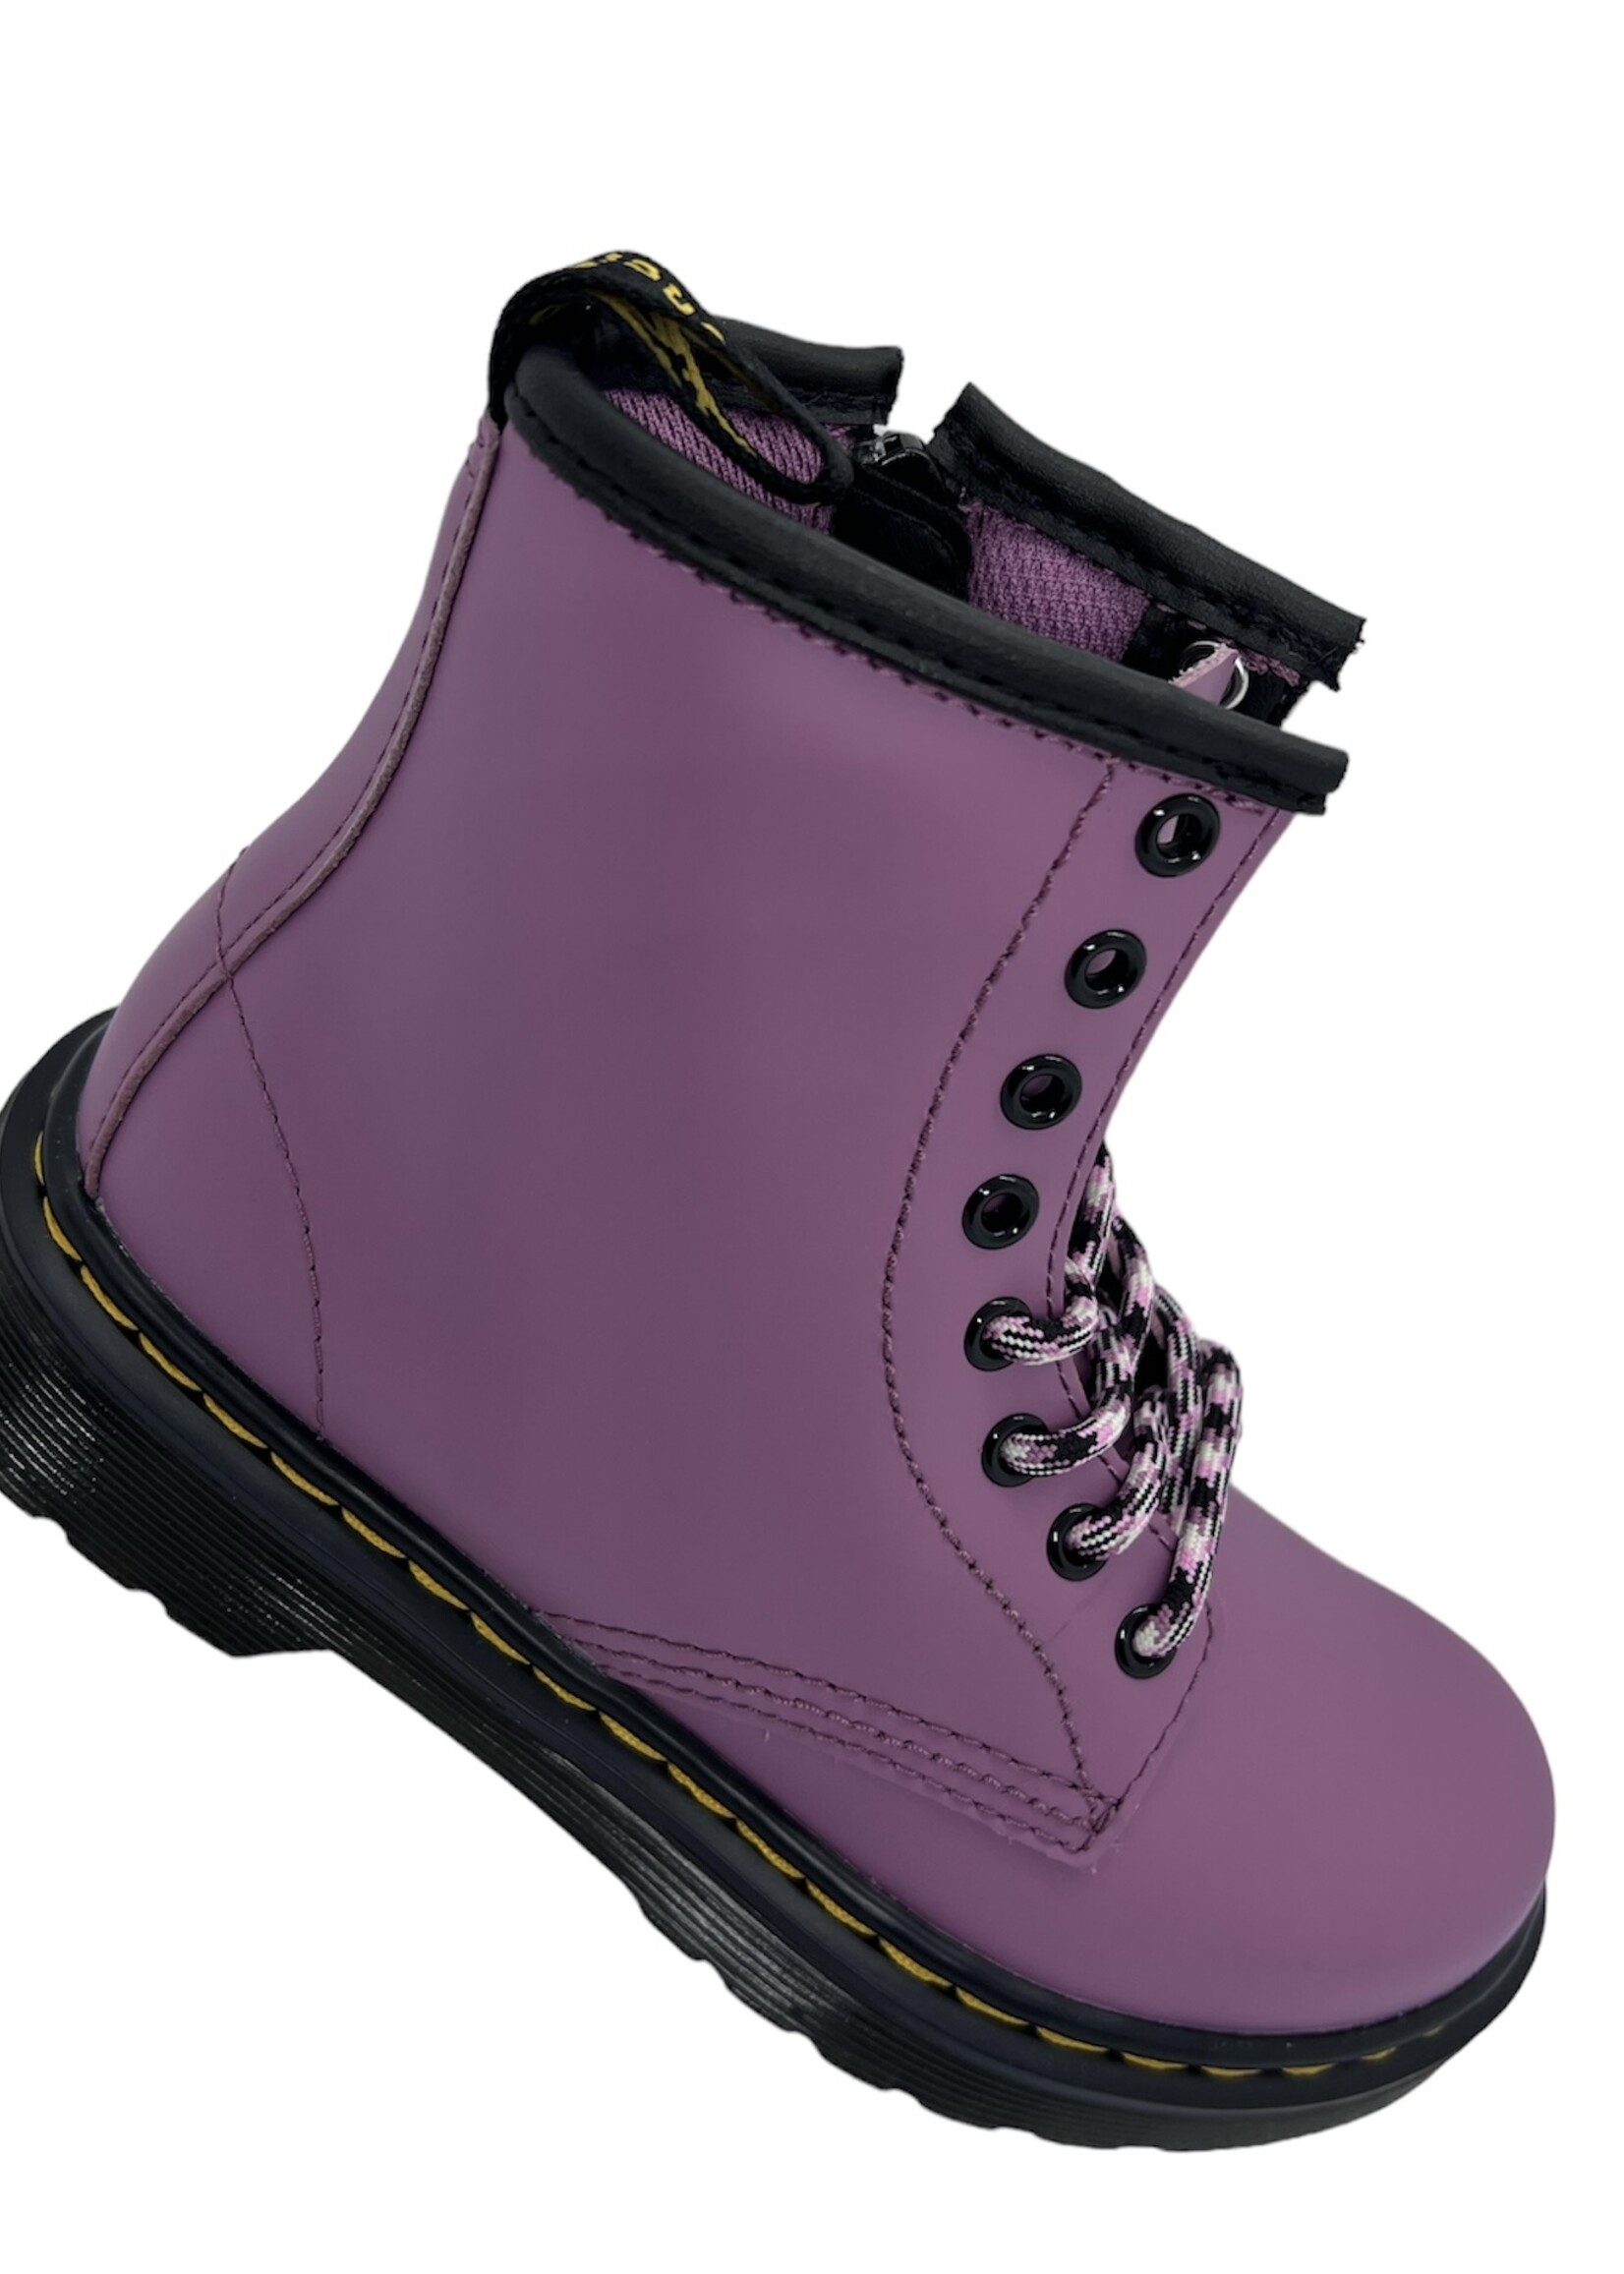 Dr Martens 1460 muted purple